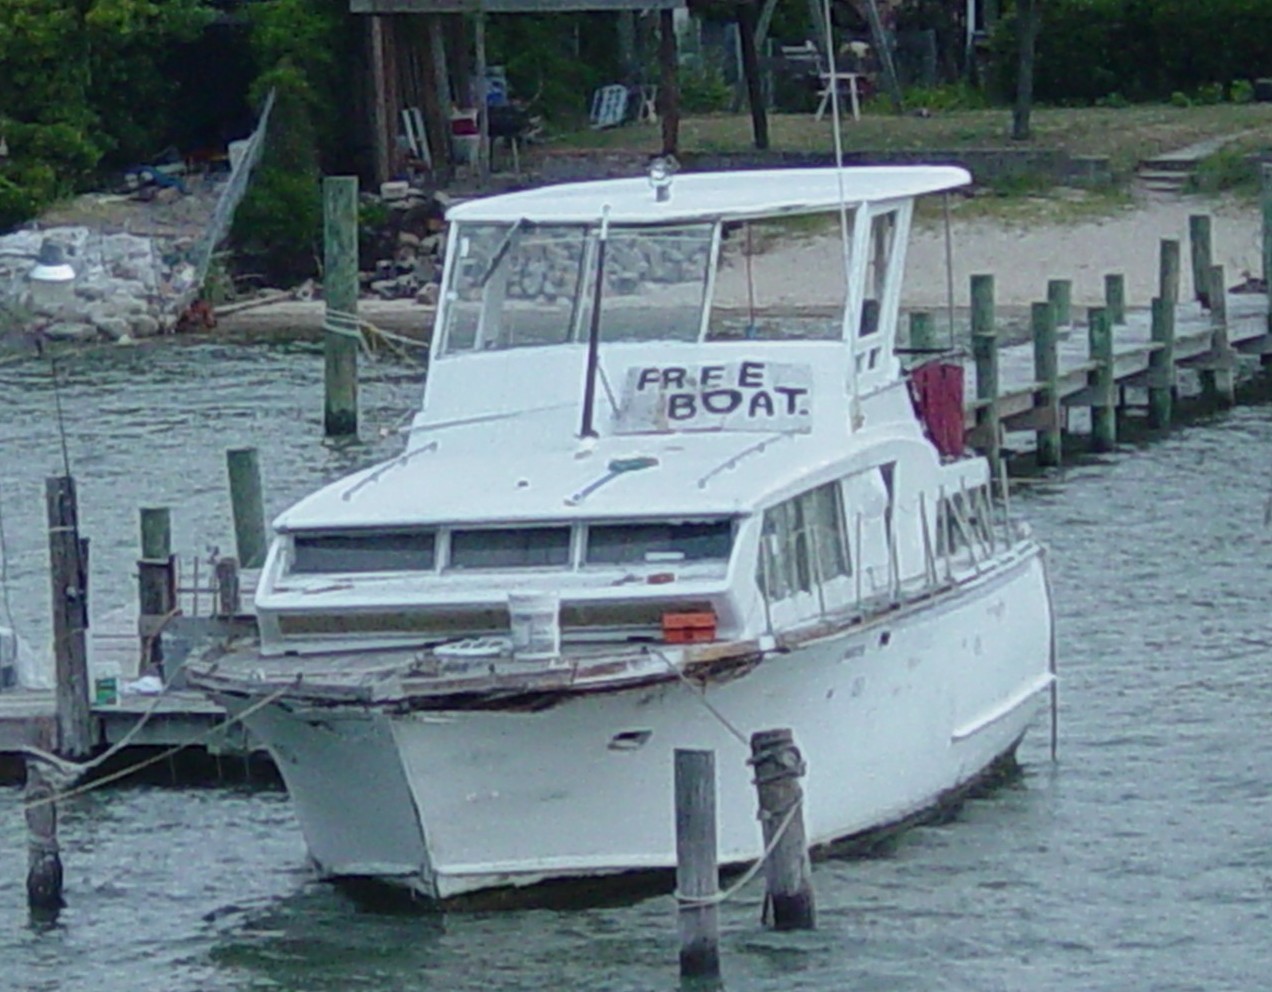 Used boat, free boat, buying a boat